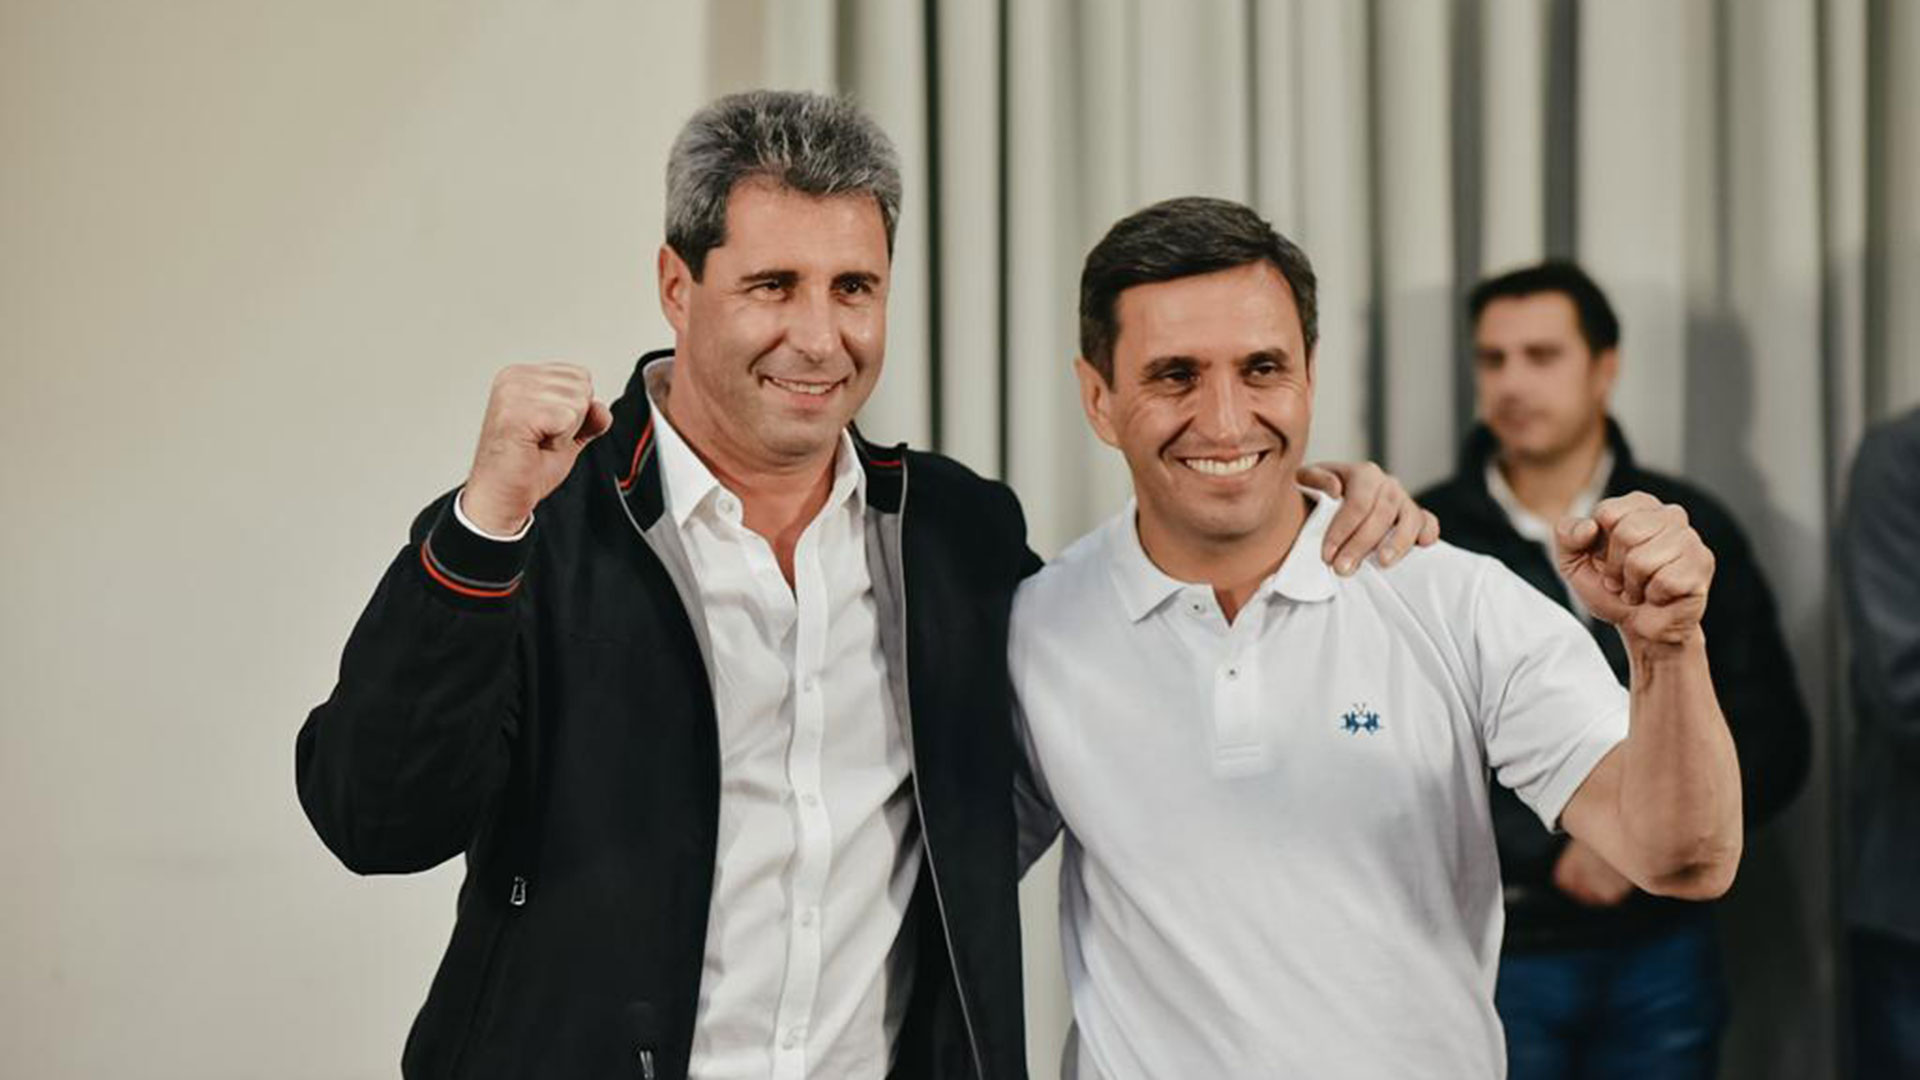 Sergio Uñac with Cristian Andina, the candidate for lieutenant governor that the president had chosen 